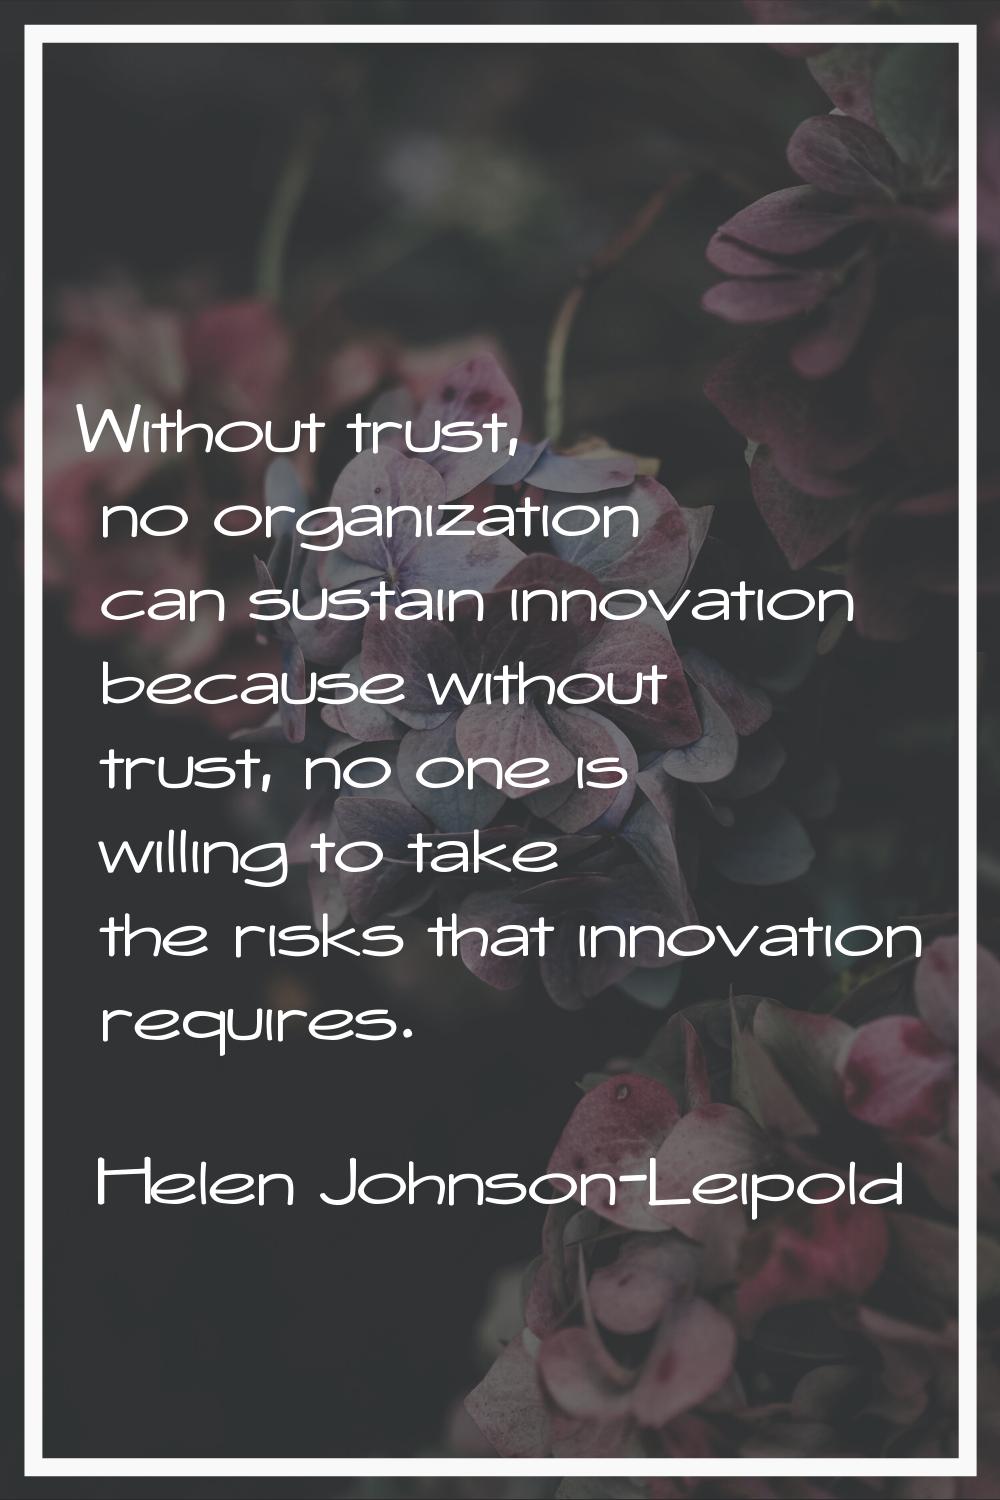 Without trust, no organization can sustain innovation because without trust, no one is willing to t